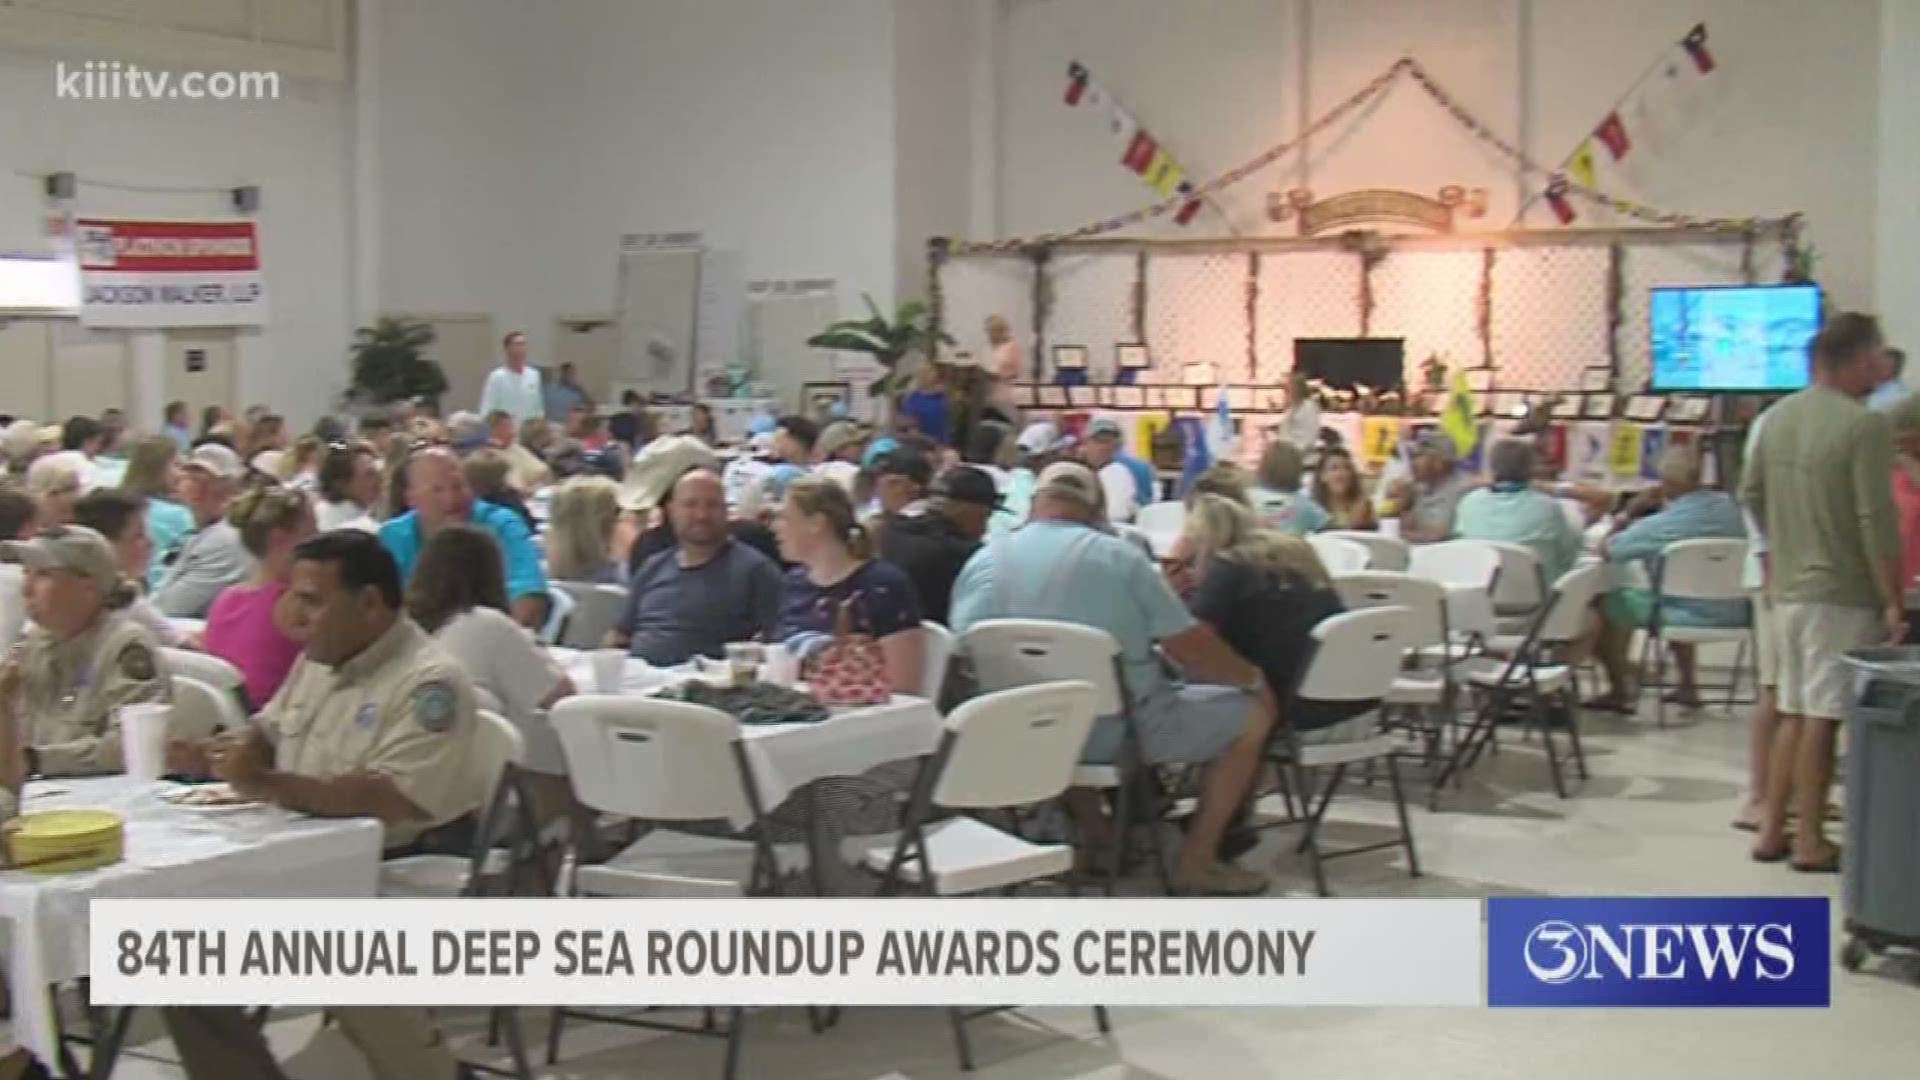 The 84th Annual Deep Sea Roundup officially came to a close today with the awards ceremony. All the participants gathered in the Port Aransas Civic Center to receive their awards. Trophies were given to each top placegetter in all the separate fish categories and also age categories. Overall, the staff working for the tournament think's this year was a big success.